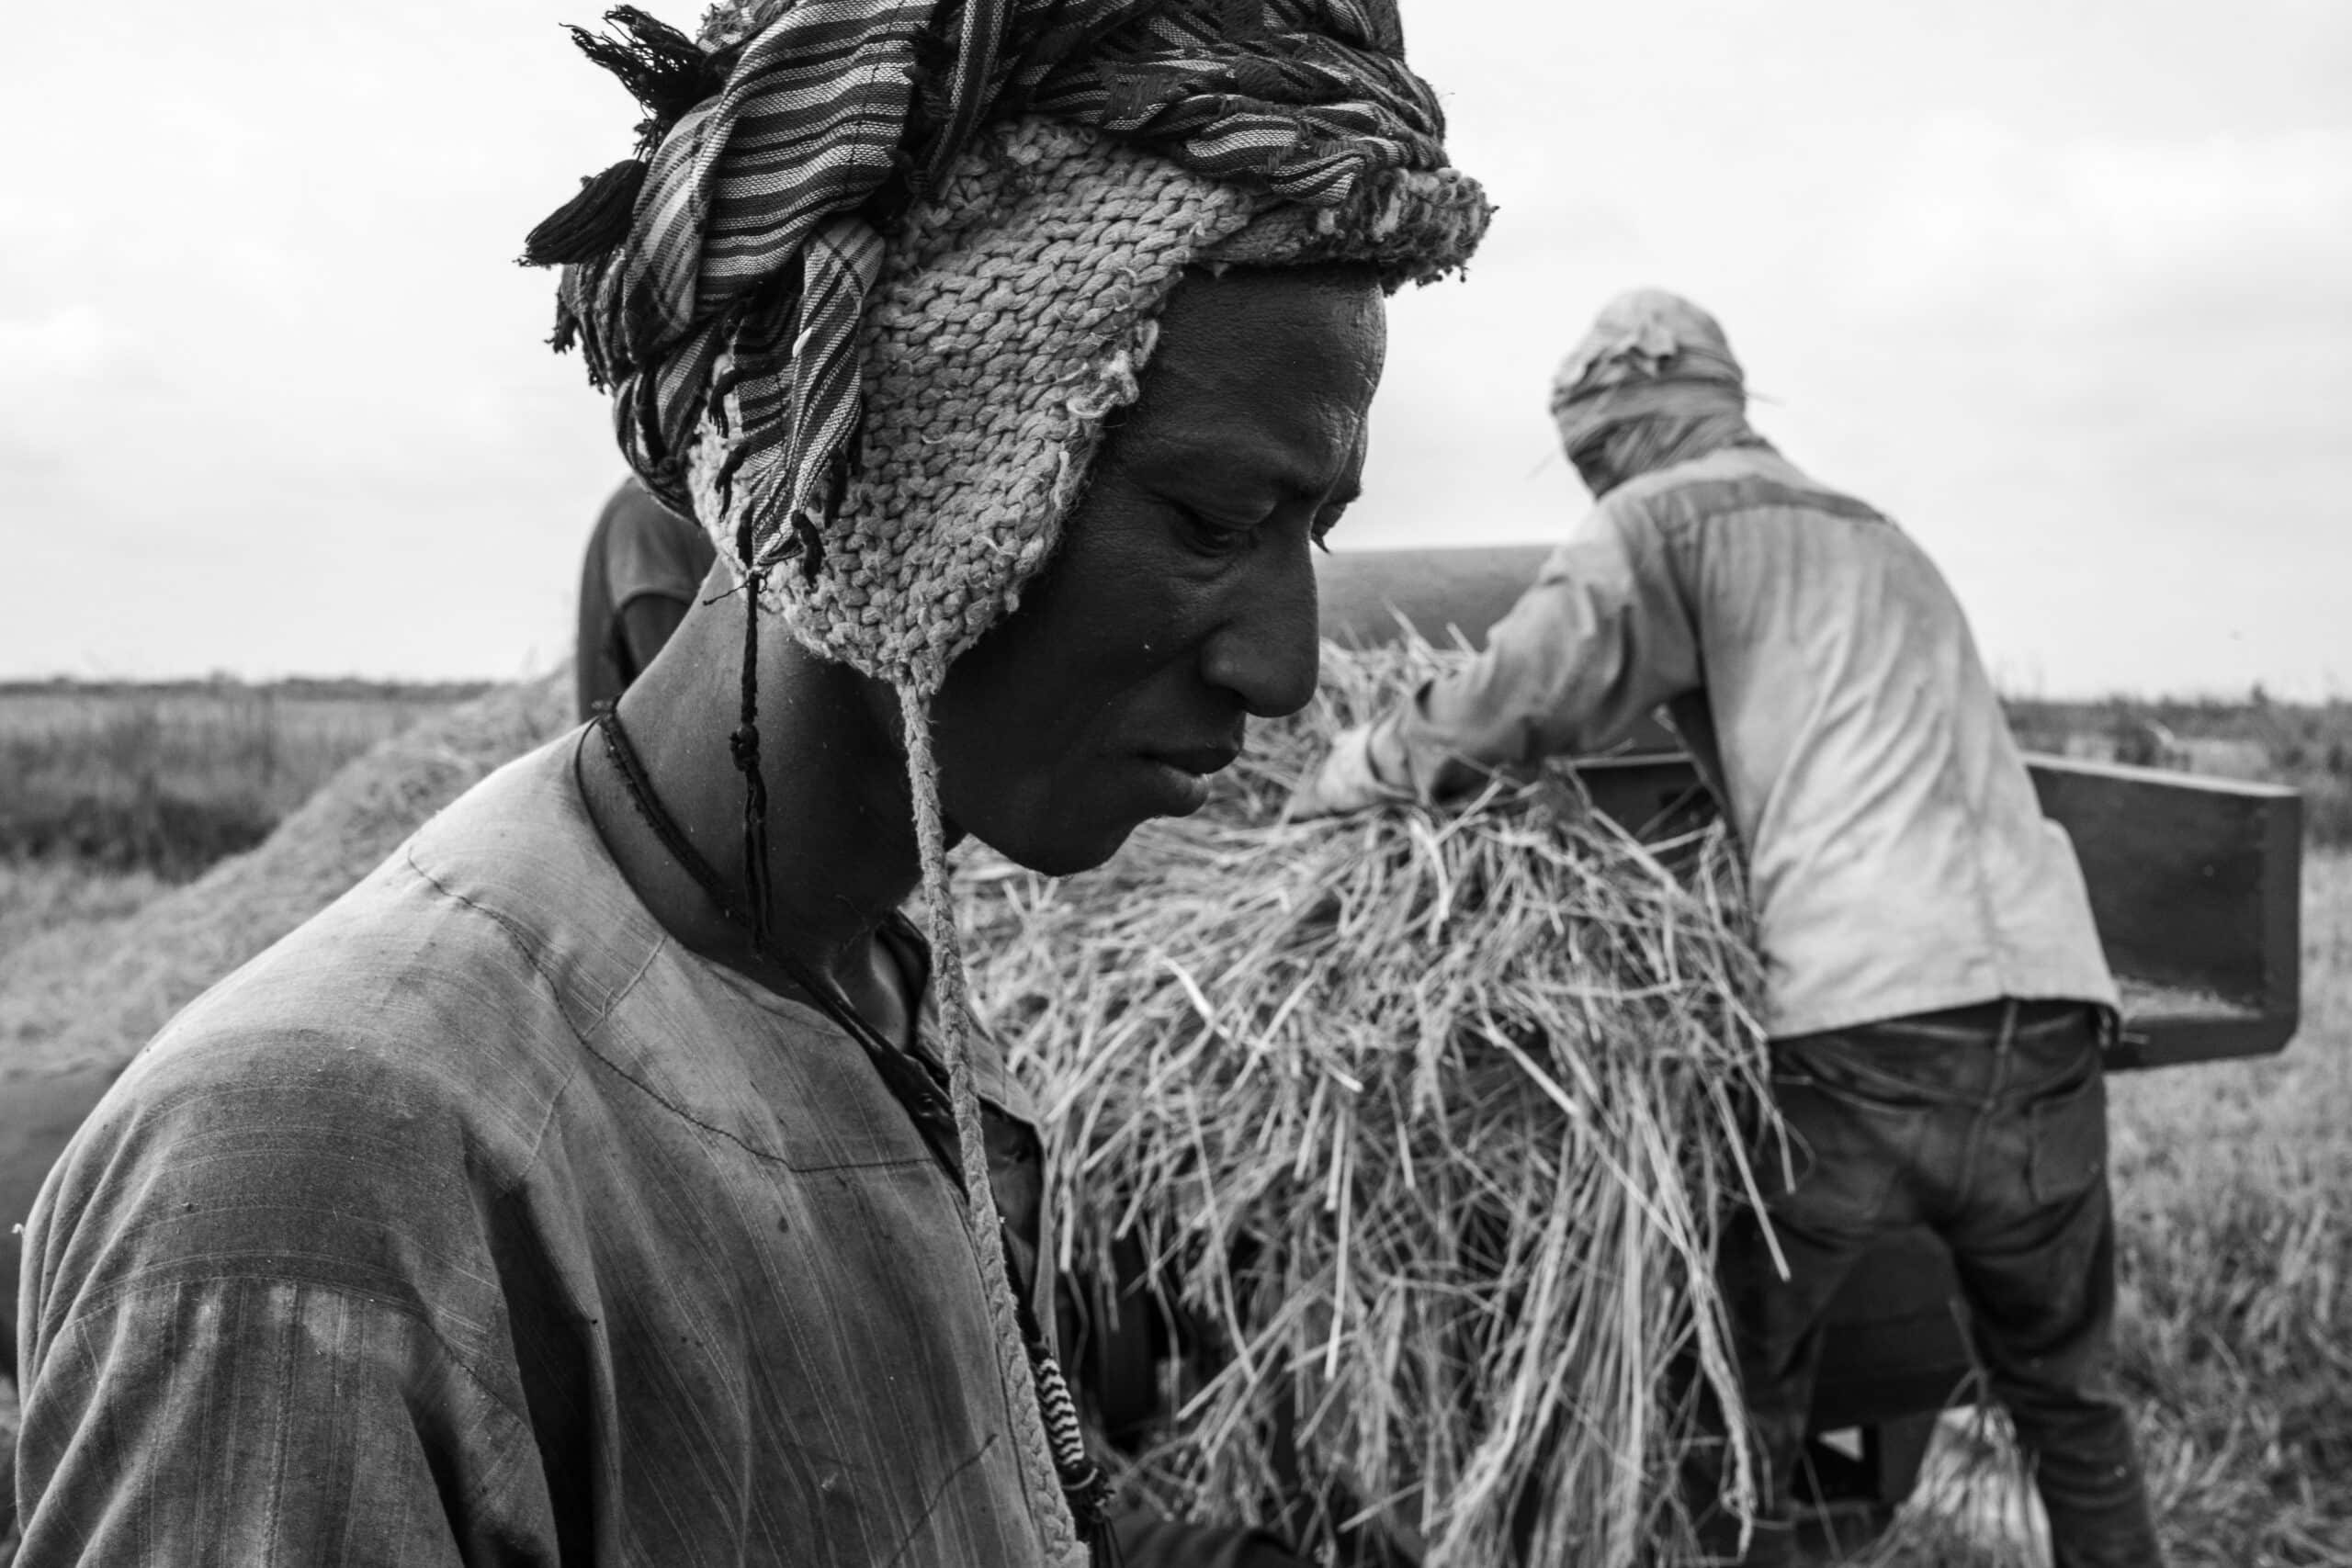 A black and white close up of a man in front of a vehicle being loaded with cereal grasses.